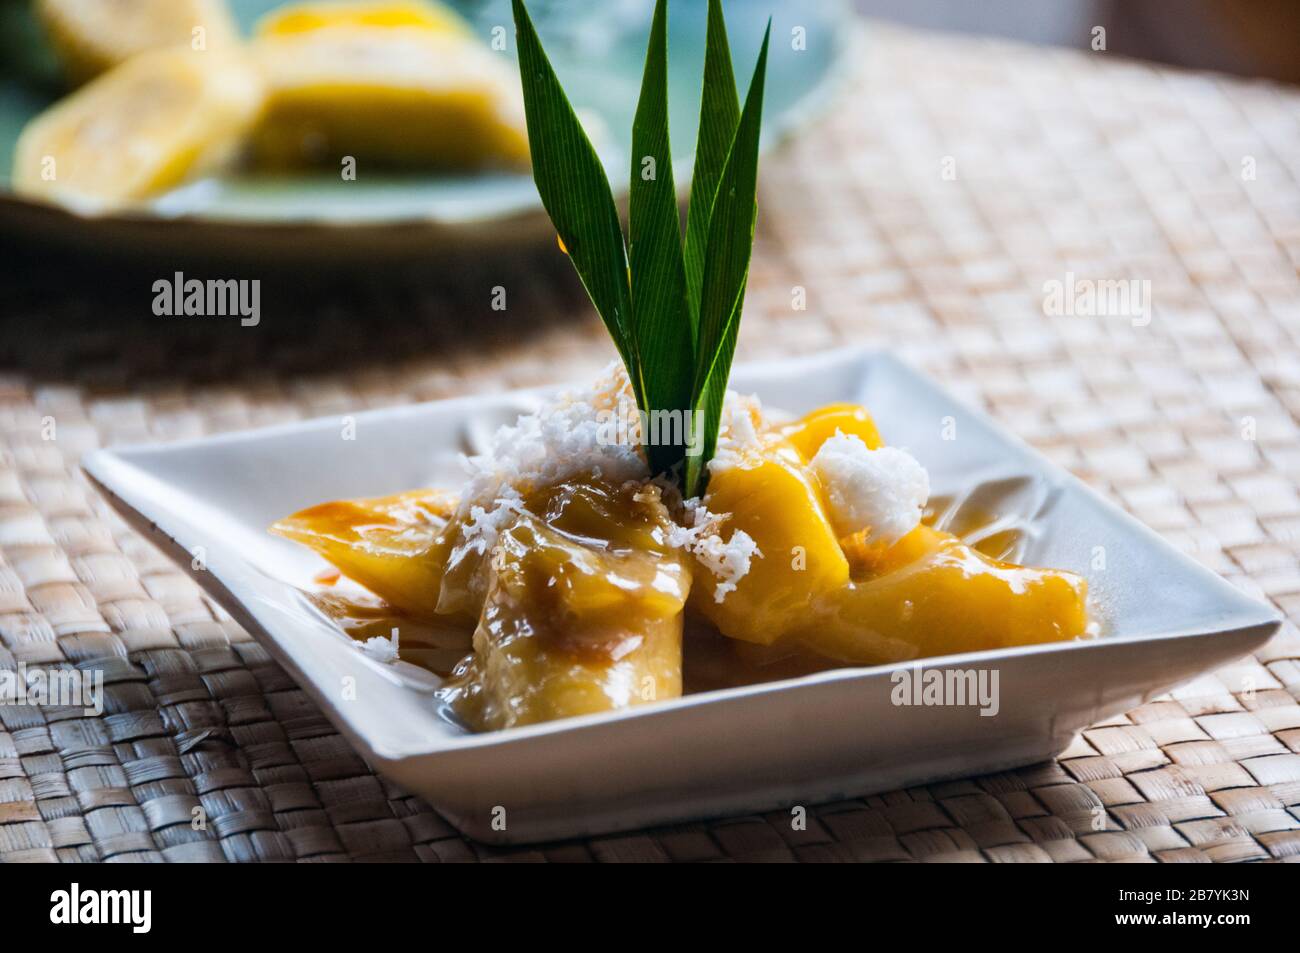 Balinese dessert boiled banana in palm sugar syrup. It also contains jackfruit and coconut Stock Photo